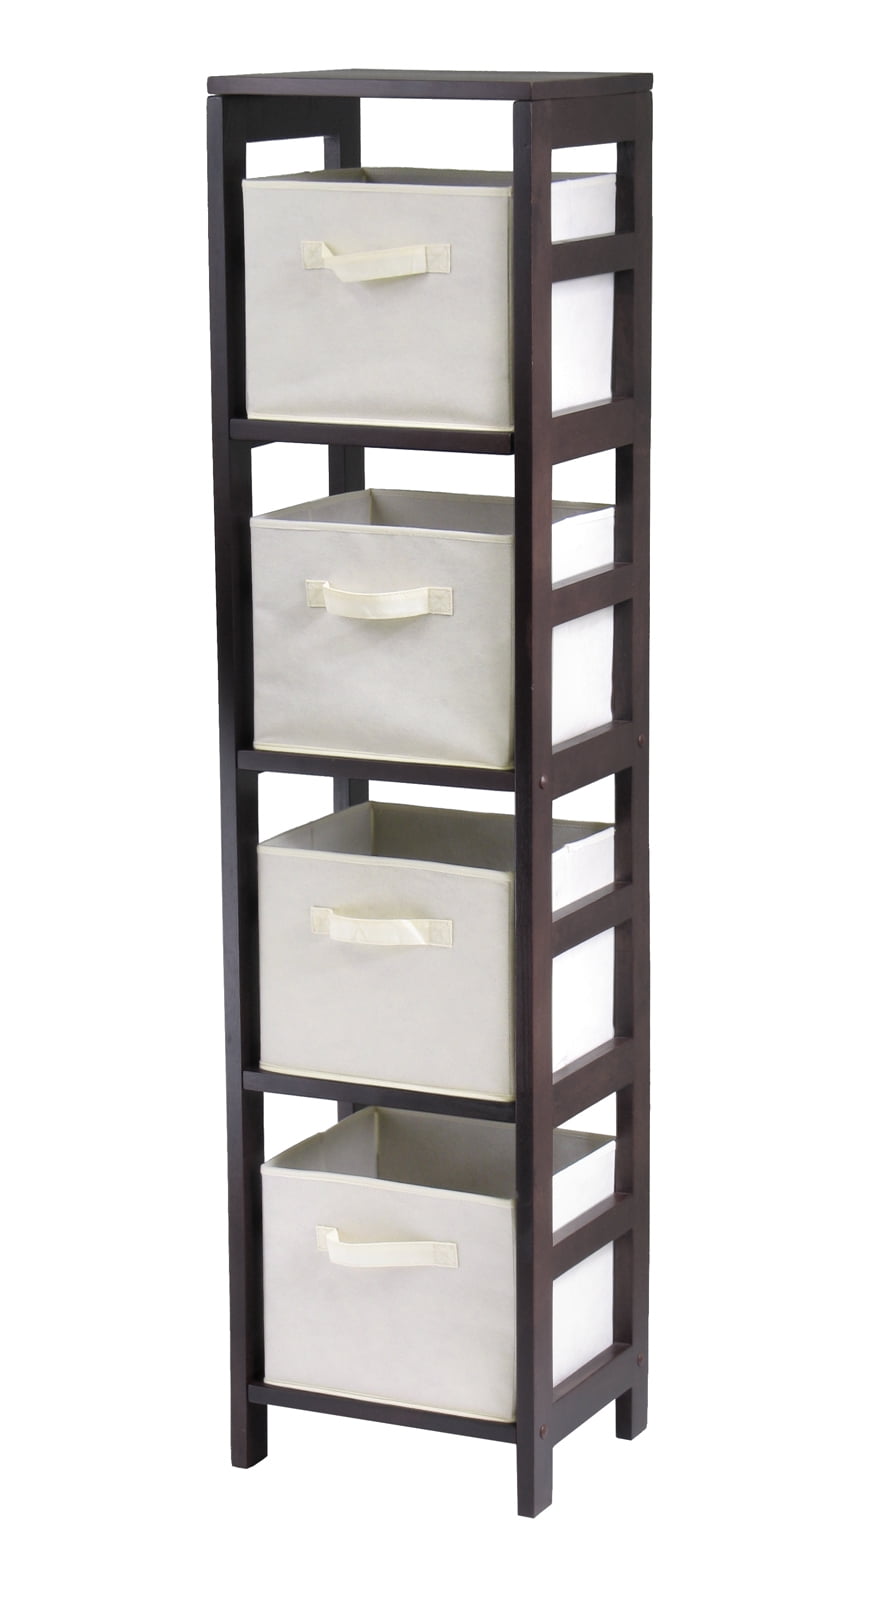 Winsome Wood Terrace 4-pc Storage Shelf with 3 Foldable Woven Baskets in Walnut and Chocolate - 92401